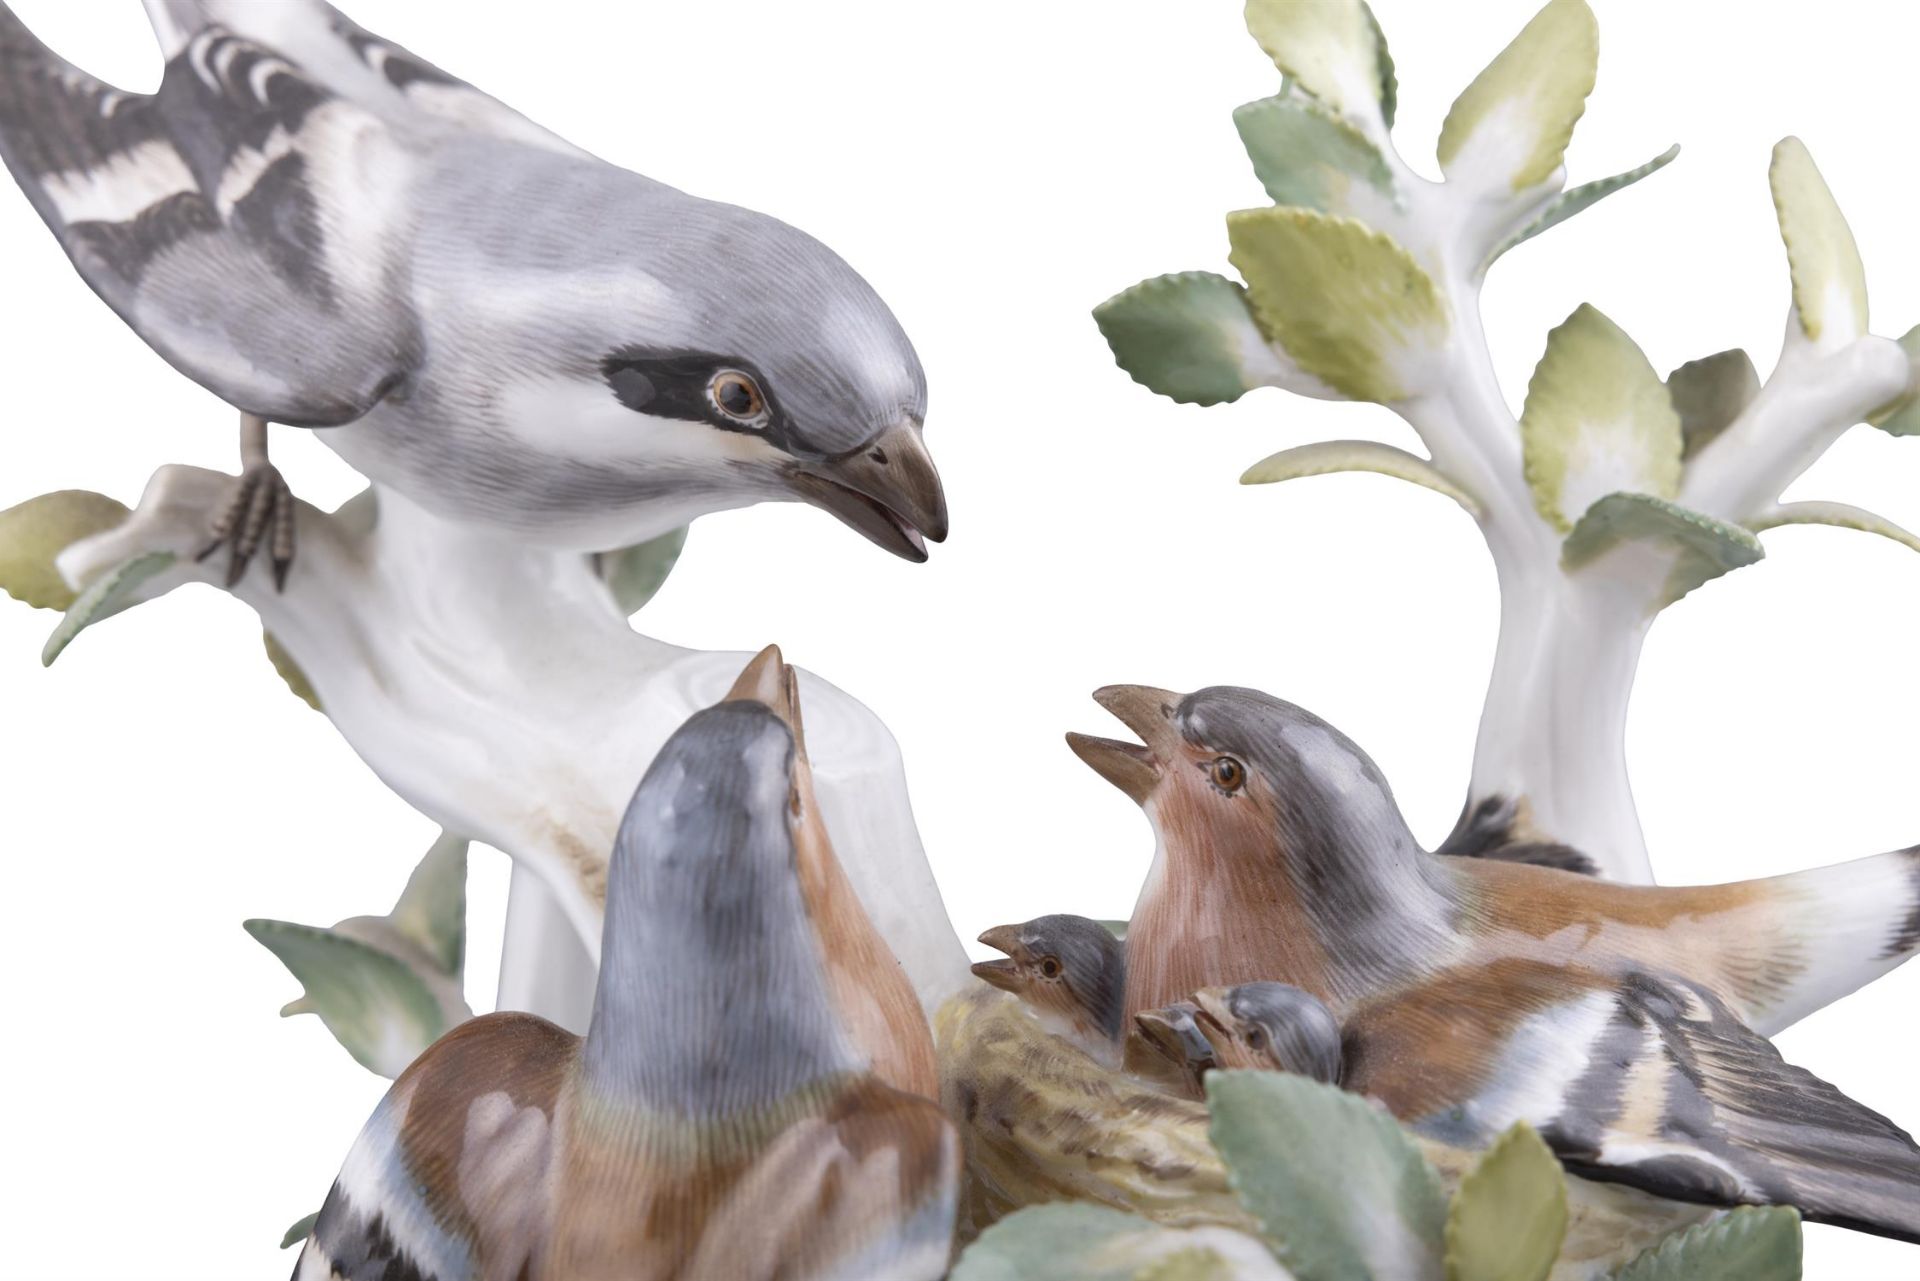 A 19TH CENTURY MEISSEN PAINTED PORCELAIN GROUP OF NESTING WRENS in a leafy bough protecting the - Image 4 of 6